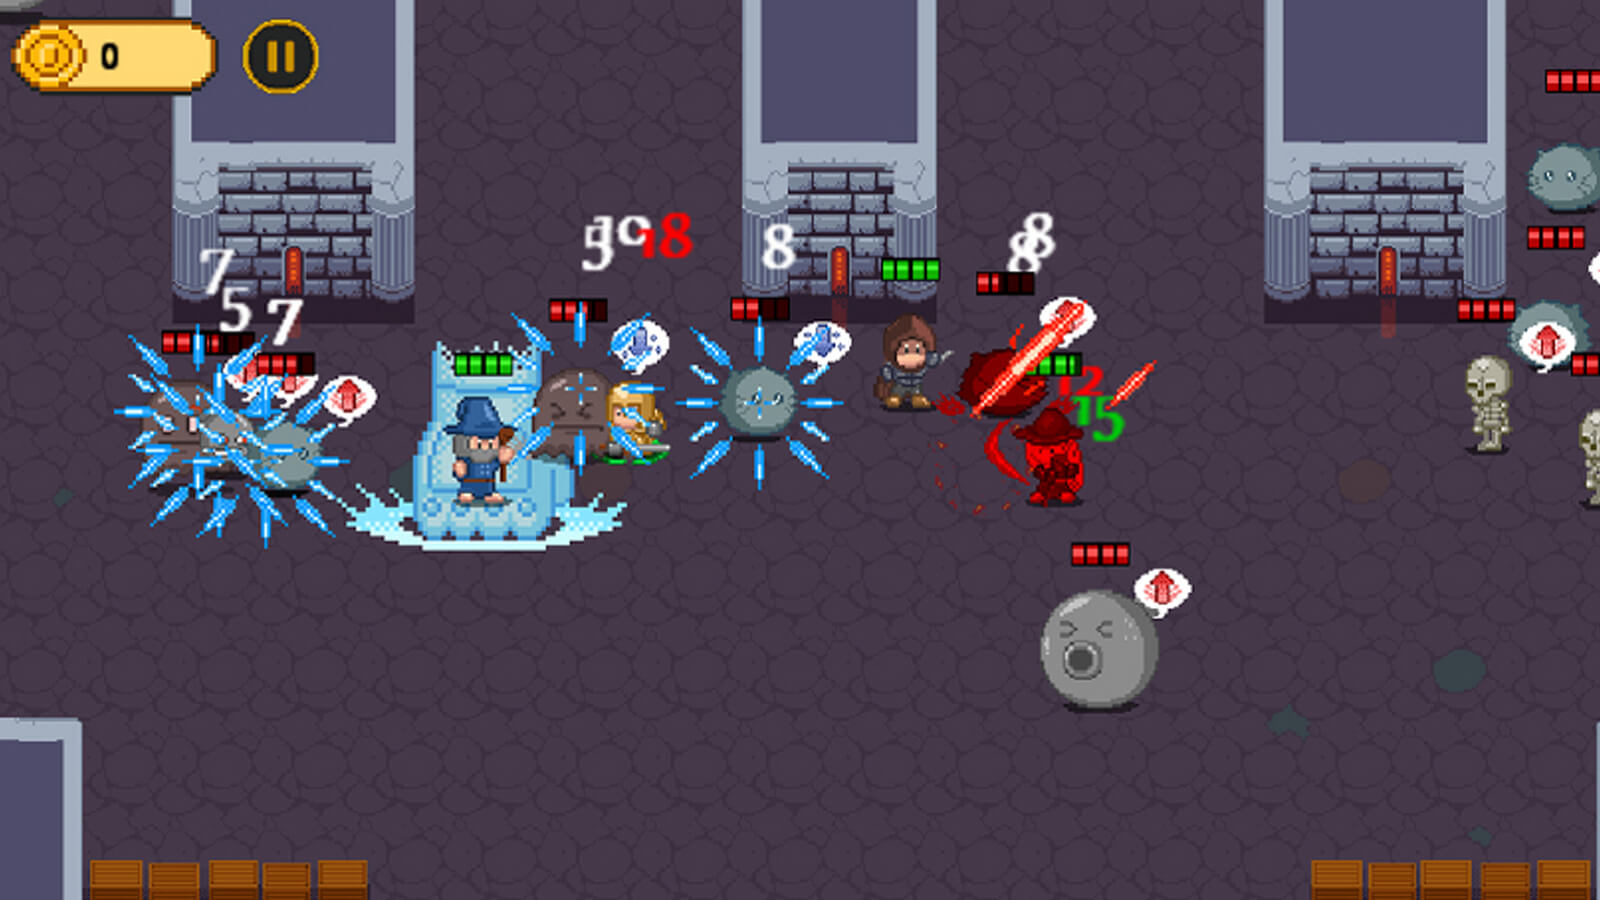 Three characters fight a group of gray sphere enemies. Damage indicators and HP bars can be seen throughout.